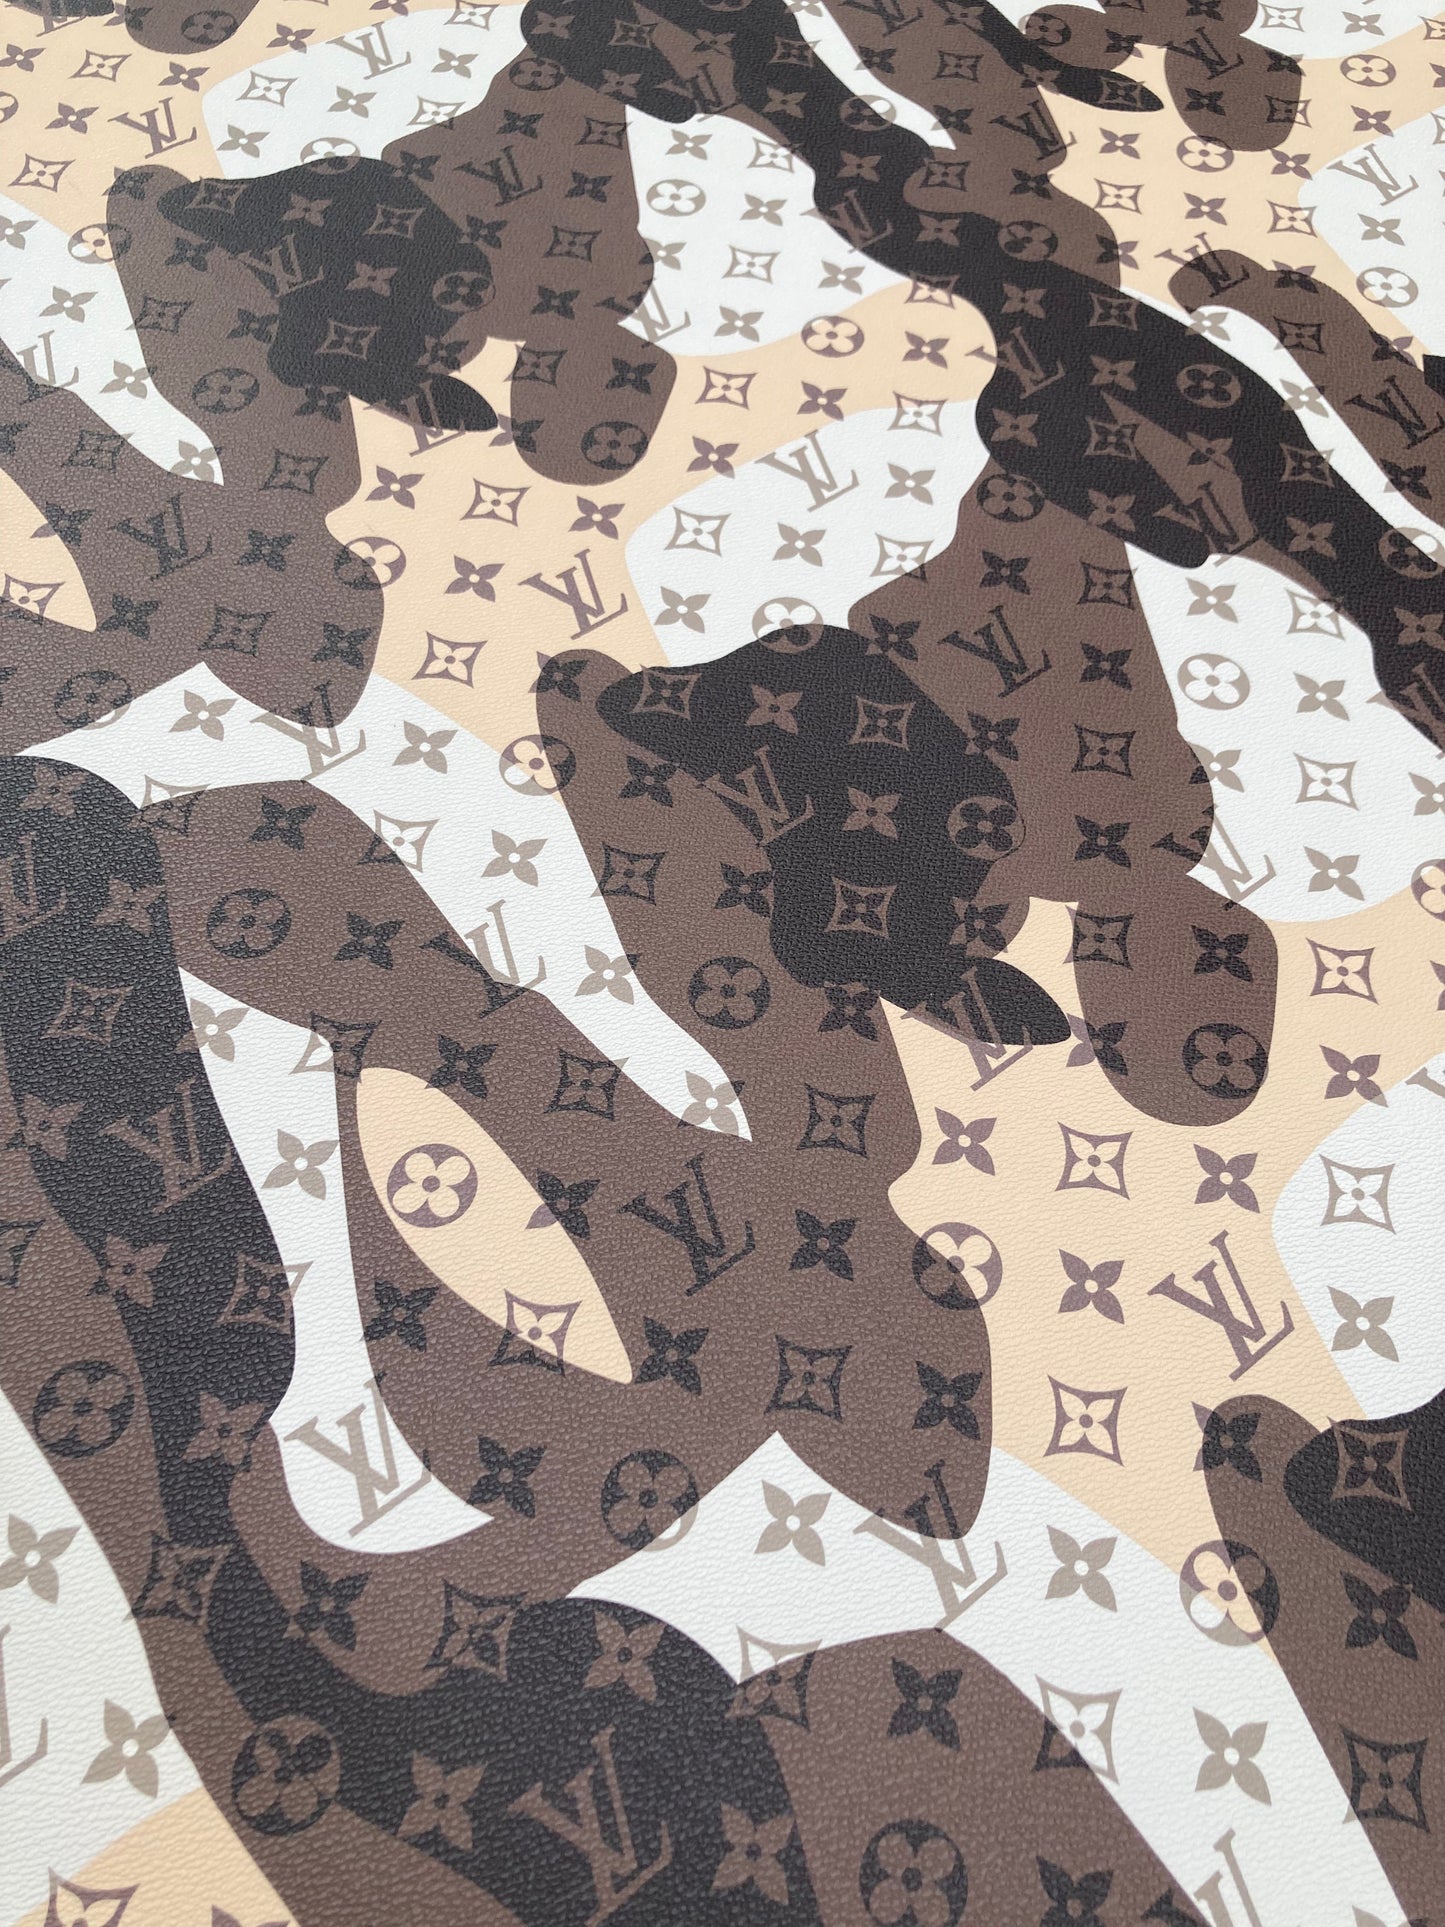 Custom Leather Brown Camouflage LV Monogram for DIY Sewing Sneakers